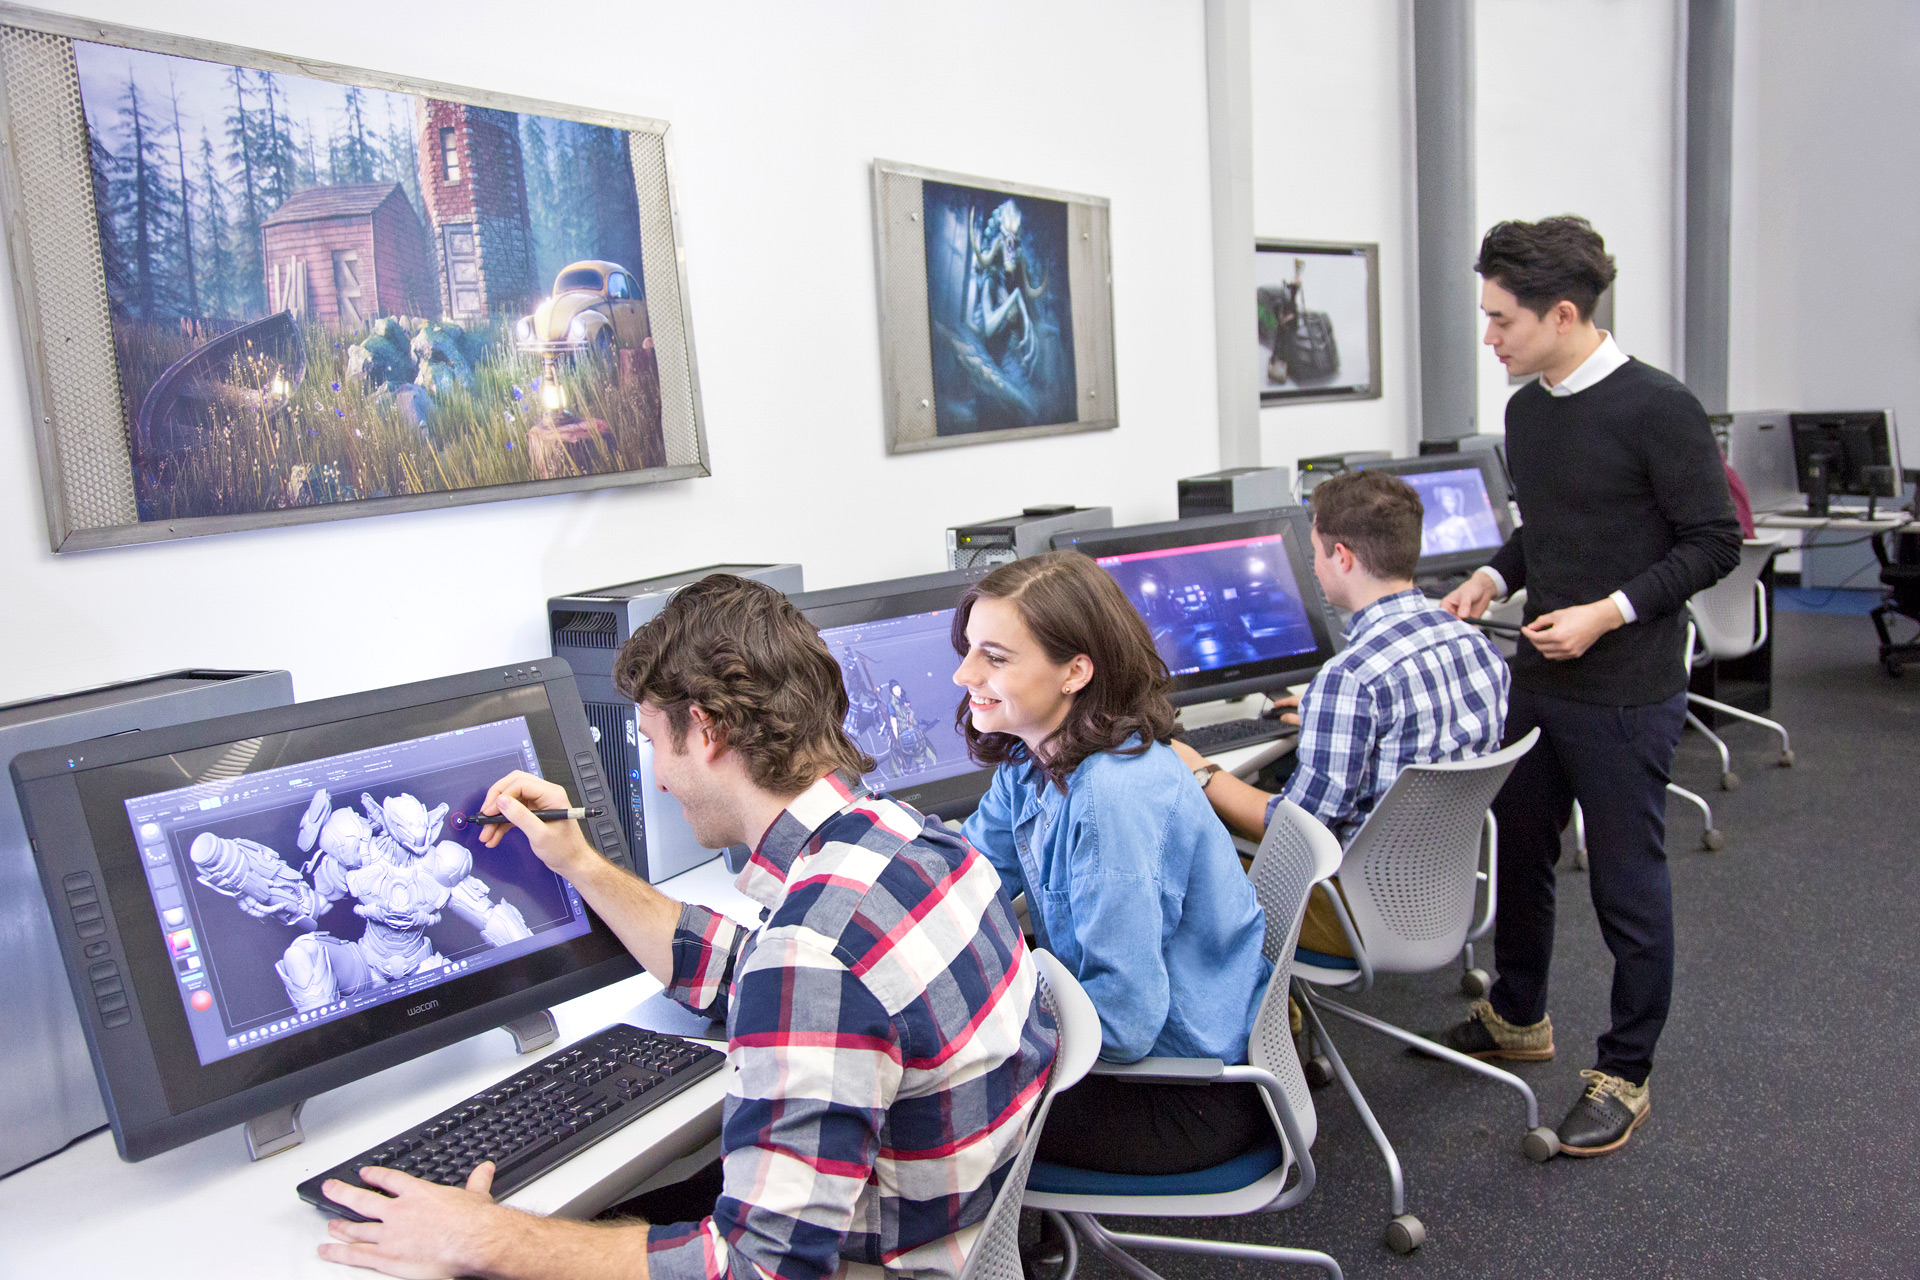 Explore SCAD eLearning and the interactive design and game development